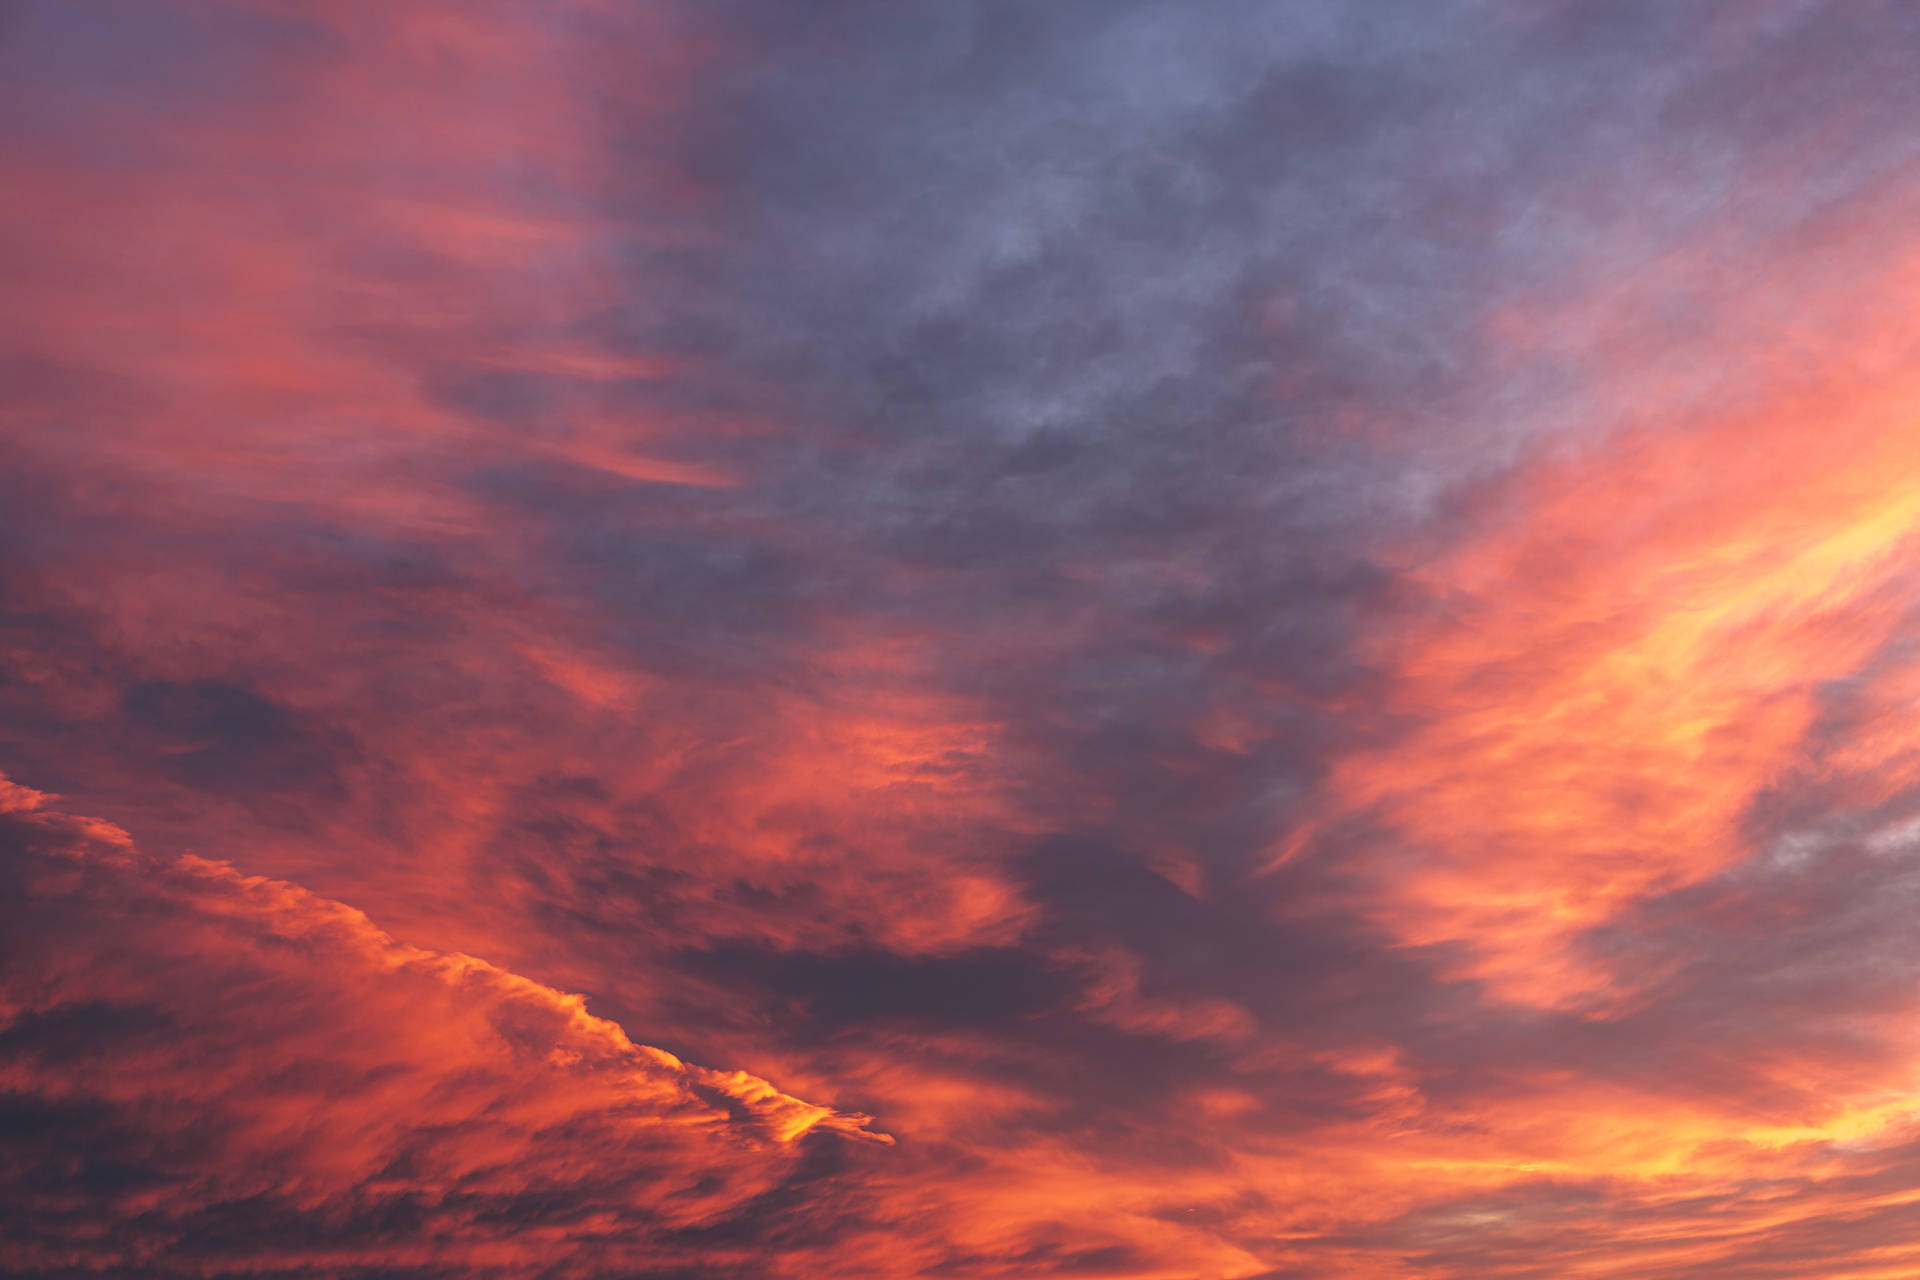 Sunset Red And Orange Clouds iMac 4K Wallpaper